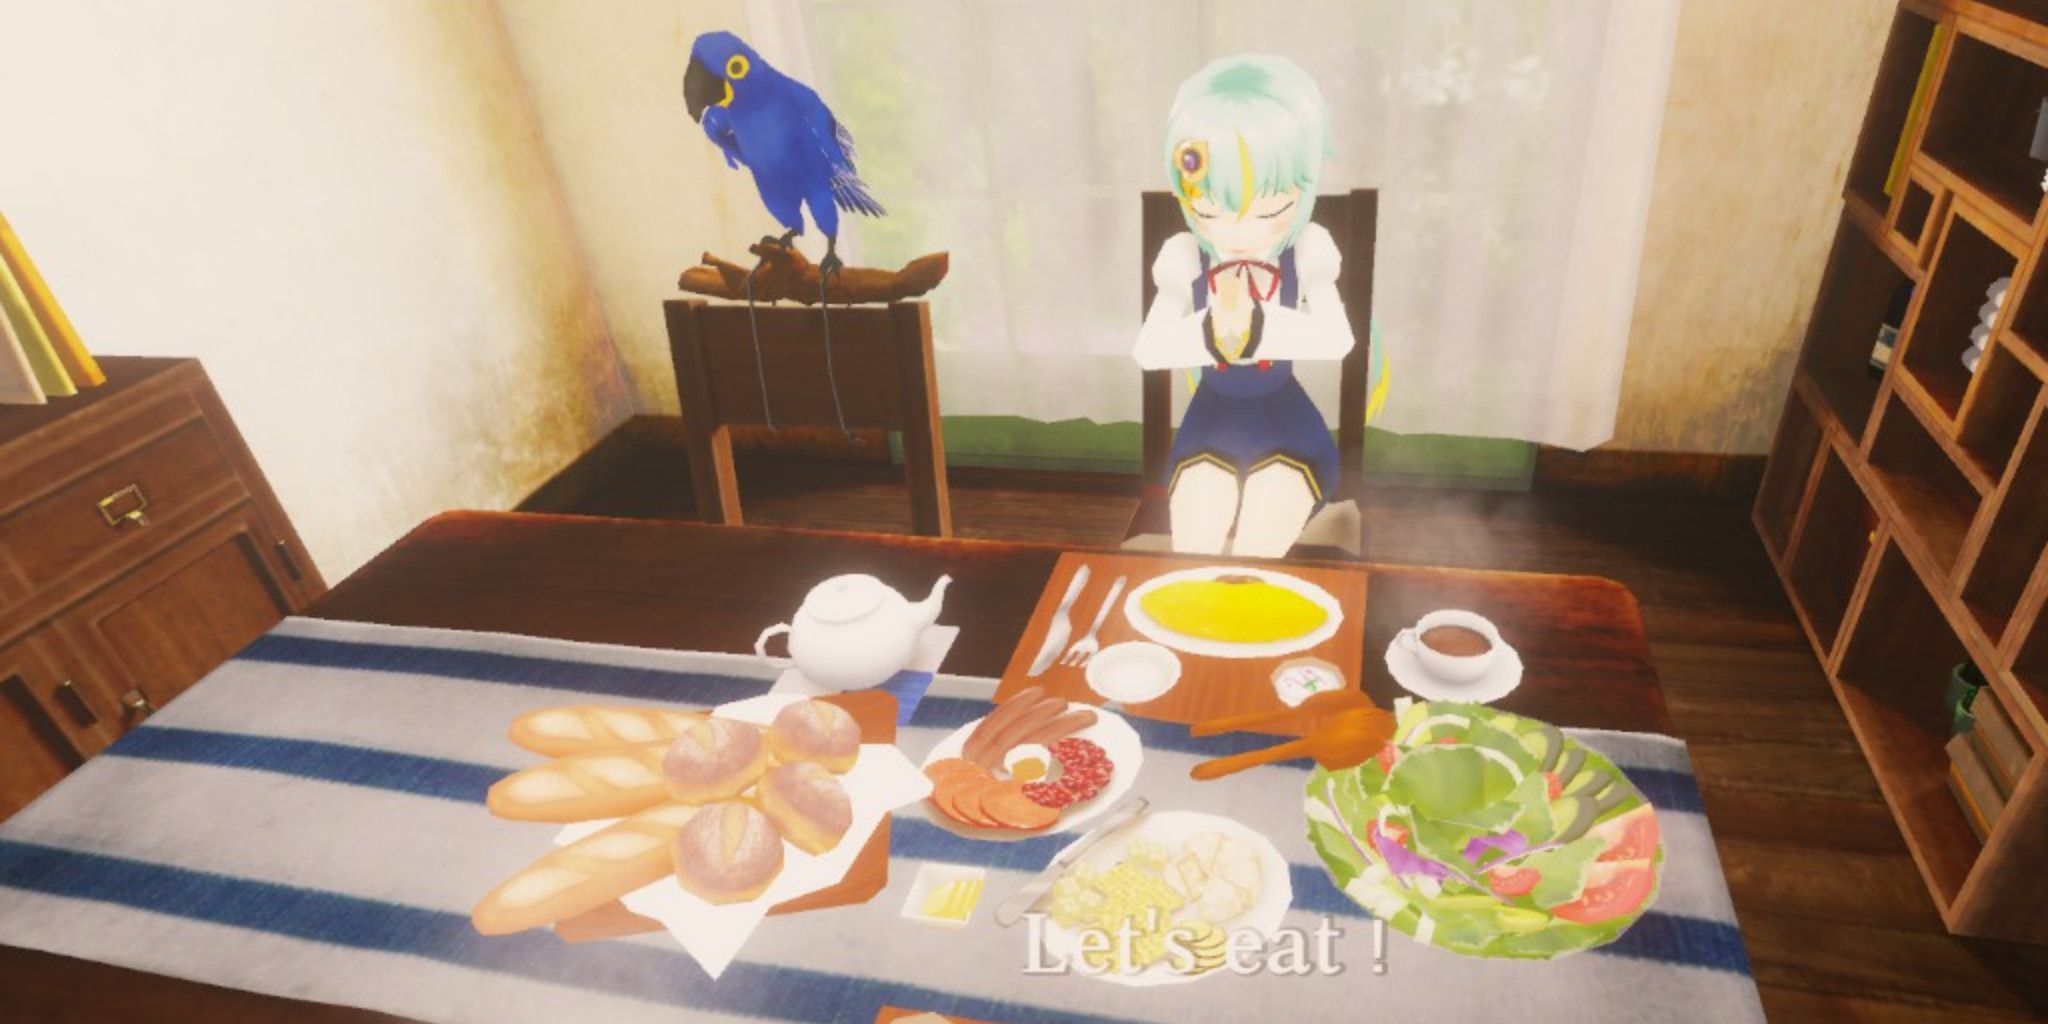 The player sitting down with Luclei and sharing a meal with her